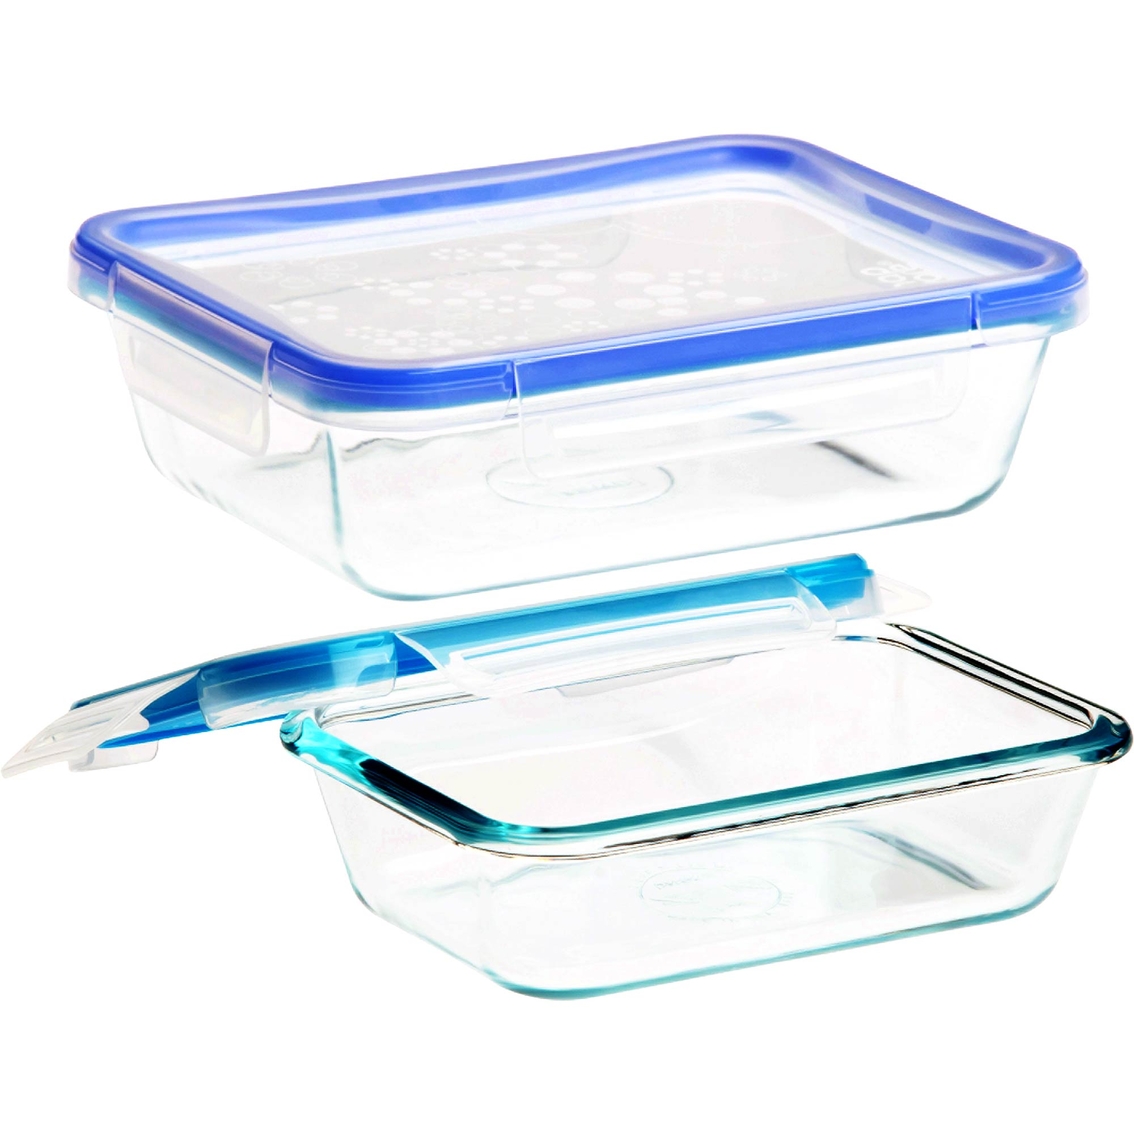 Snapware Total Solutions Pyrex Glass Food Storage 4 Pc. Value Pack